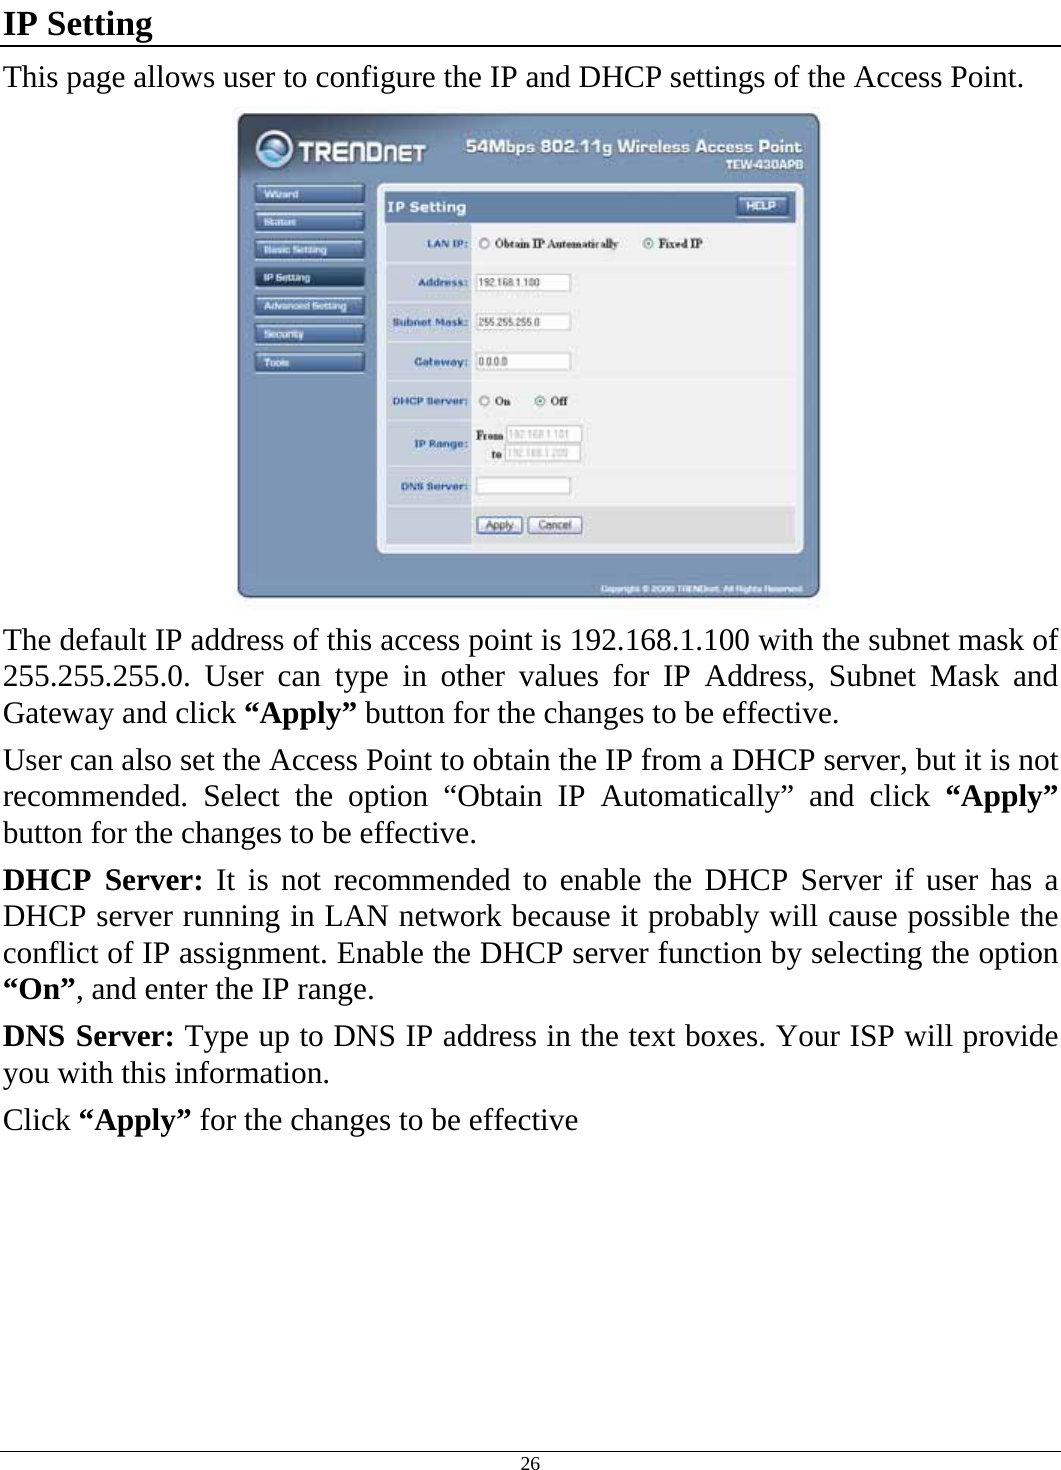  26 IP Setting This page allows user to configure the IP and DHCP settings of the Access Point.  The default IP address of this access point is 192.168.1.100 with the subnet mask of 255.255.255.0. User can type in other values for IP Address, Subnet Mask and Gateway and click “Apply” button for the changes to be effective.  User can also set the Access Point to obtain the IP from a DHCP server, but it is not recommended. Select the option “Obtain IP Automatically” and click “Apply” button for the changes to be effective. DHCP Server: It is not recommended to enable the DHCP Server if user has a DHCP server running in LAN network because it probably will cause possible the conflict of IP assignment. Enable the DHCP server function by selecting the option “On”, and enter the IP range. DNS Server: Type up to DNS IP address in the text boxes. Your ISP will provide you with this information. Click “Apply” for the changes to be effective 